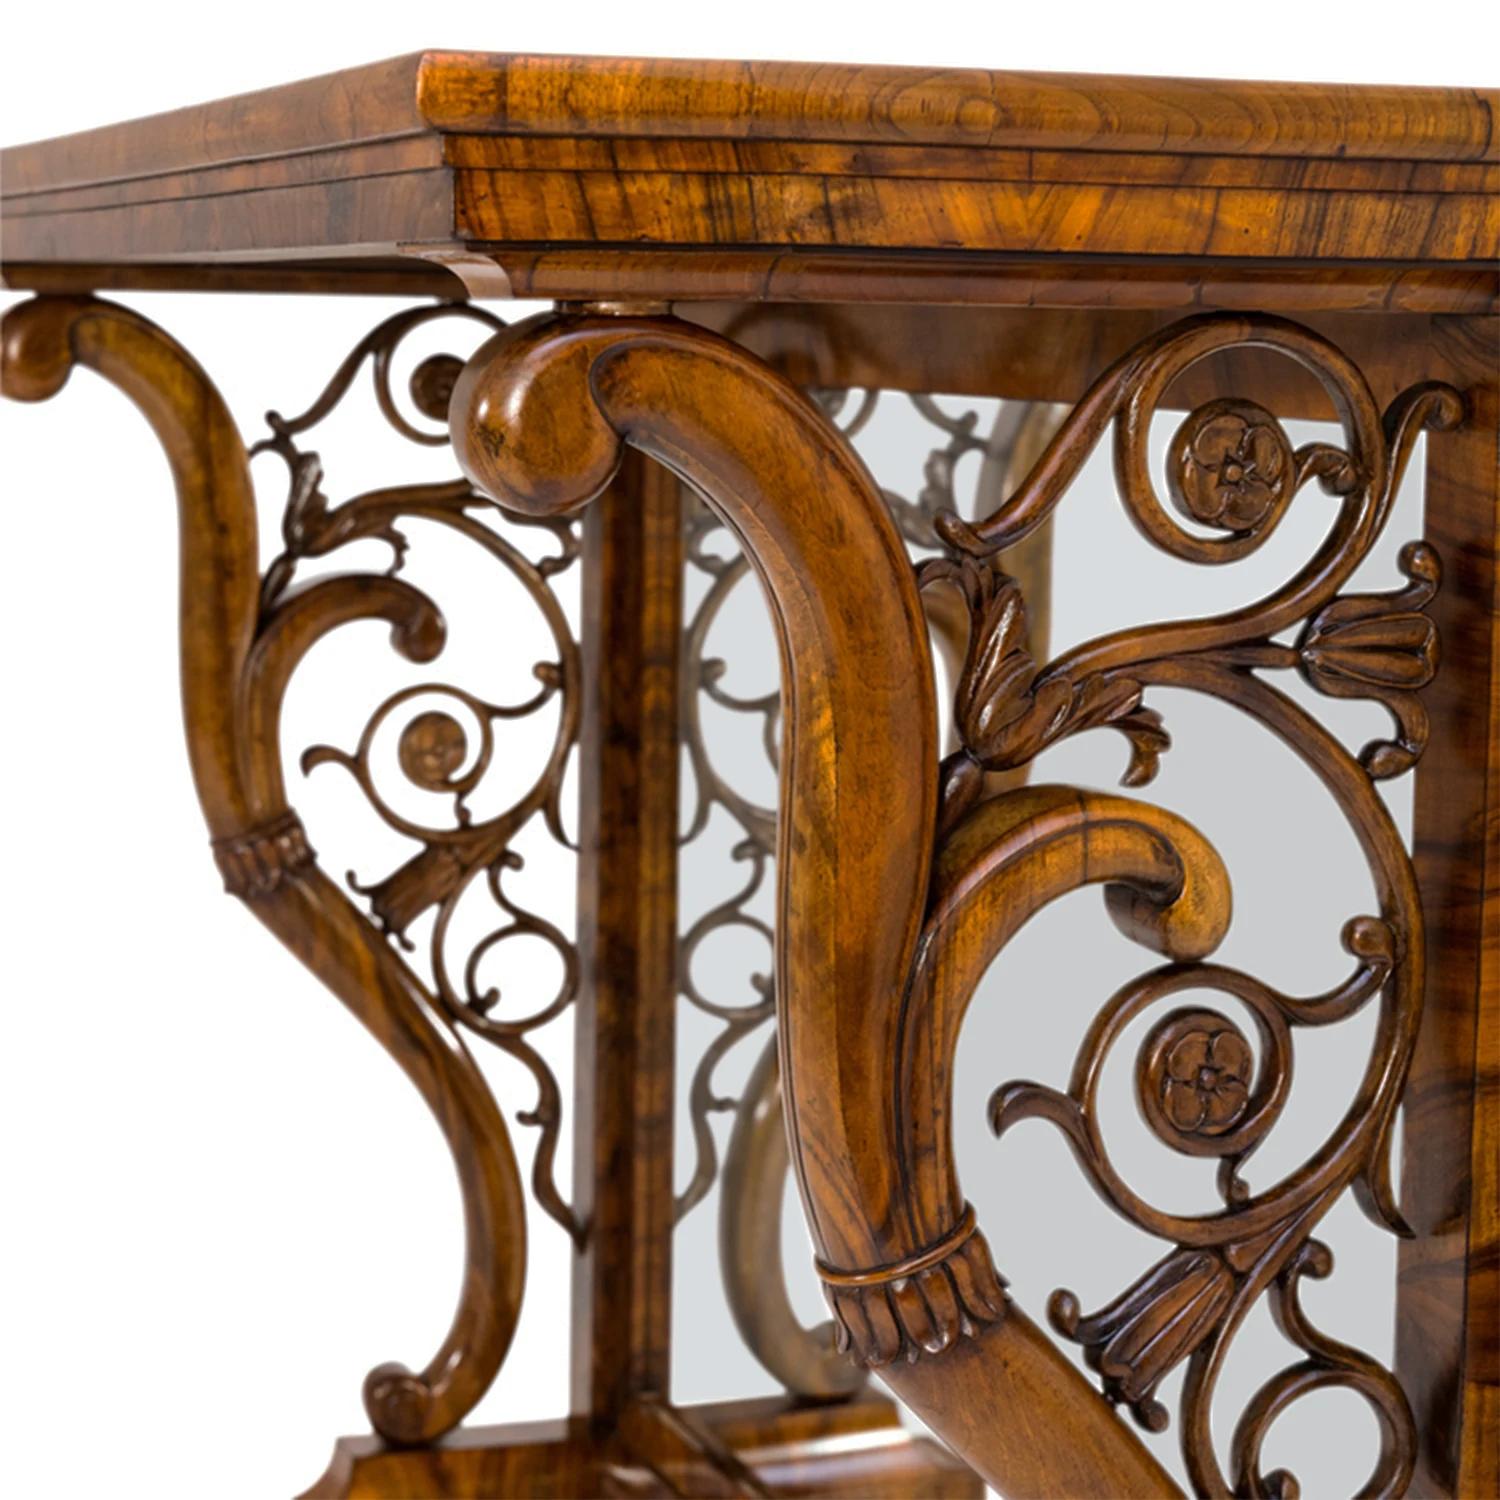 Hand-Carved 19th Century German Biedermeier Antique Polished Walnut Console Table For Sale